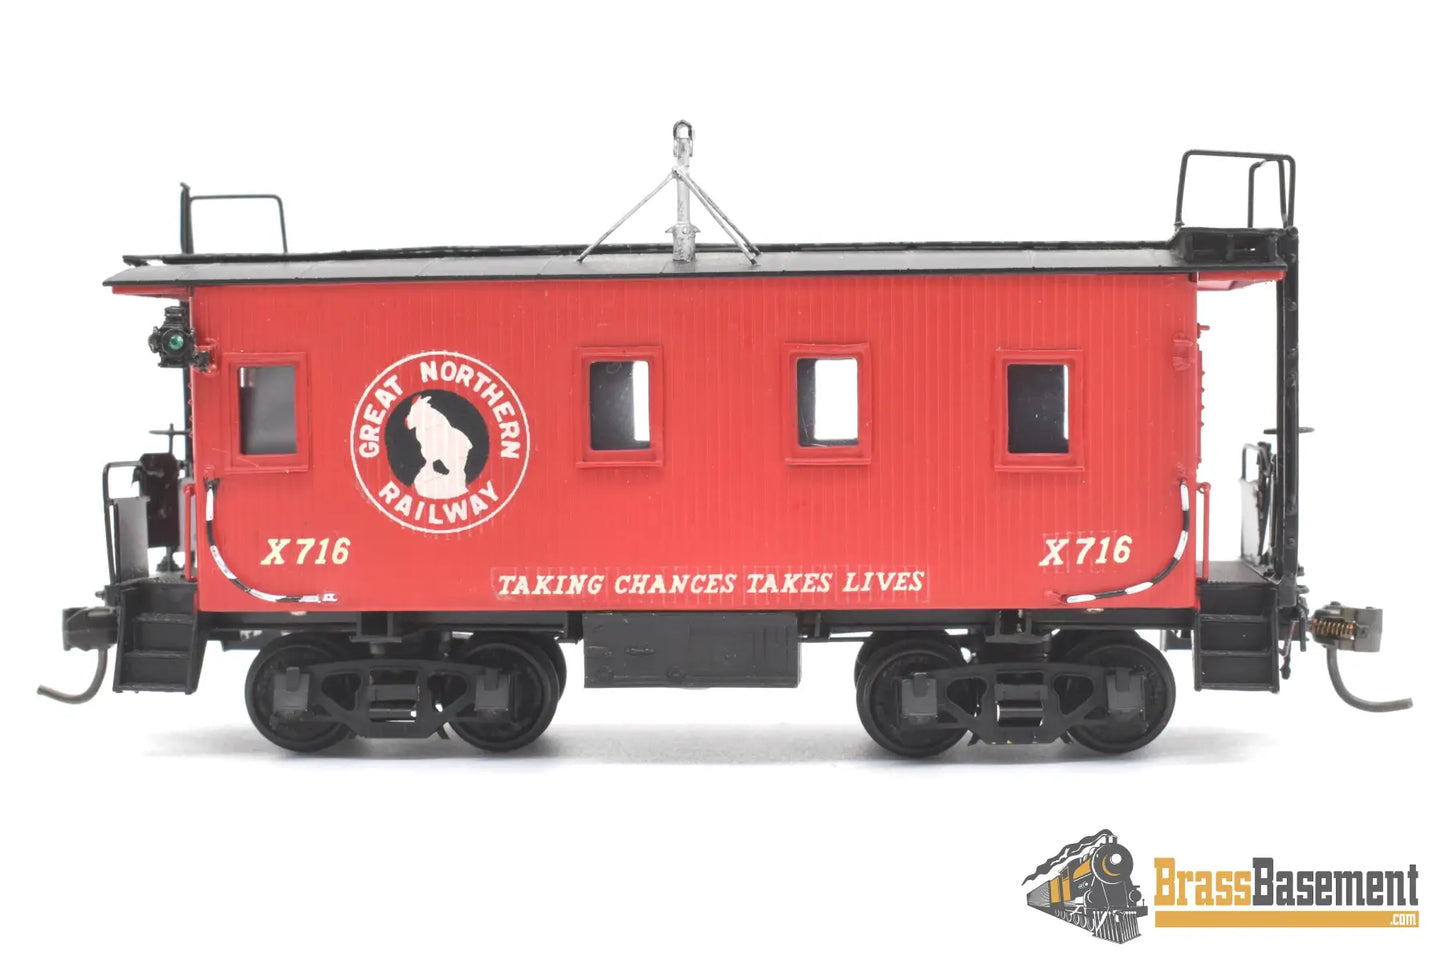 Ho Brass - Beaver Creek Great Northern Gn Wood Caboose X716 Transfer F/P